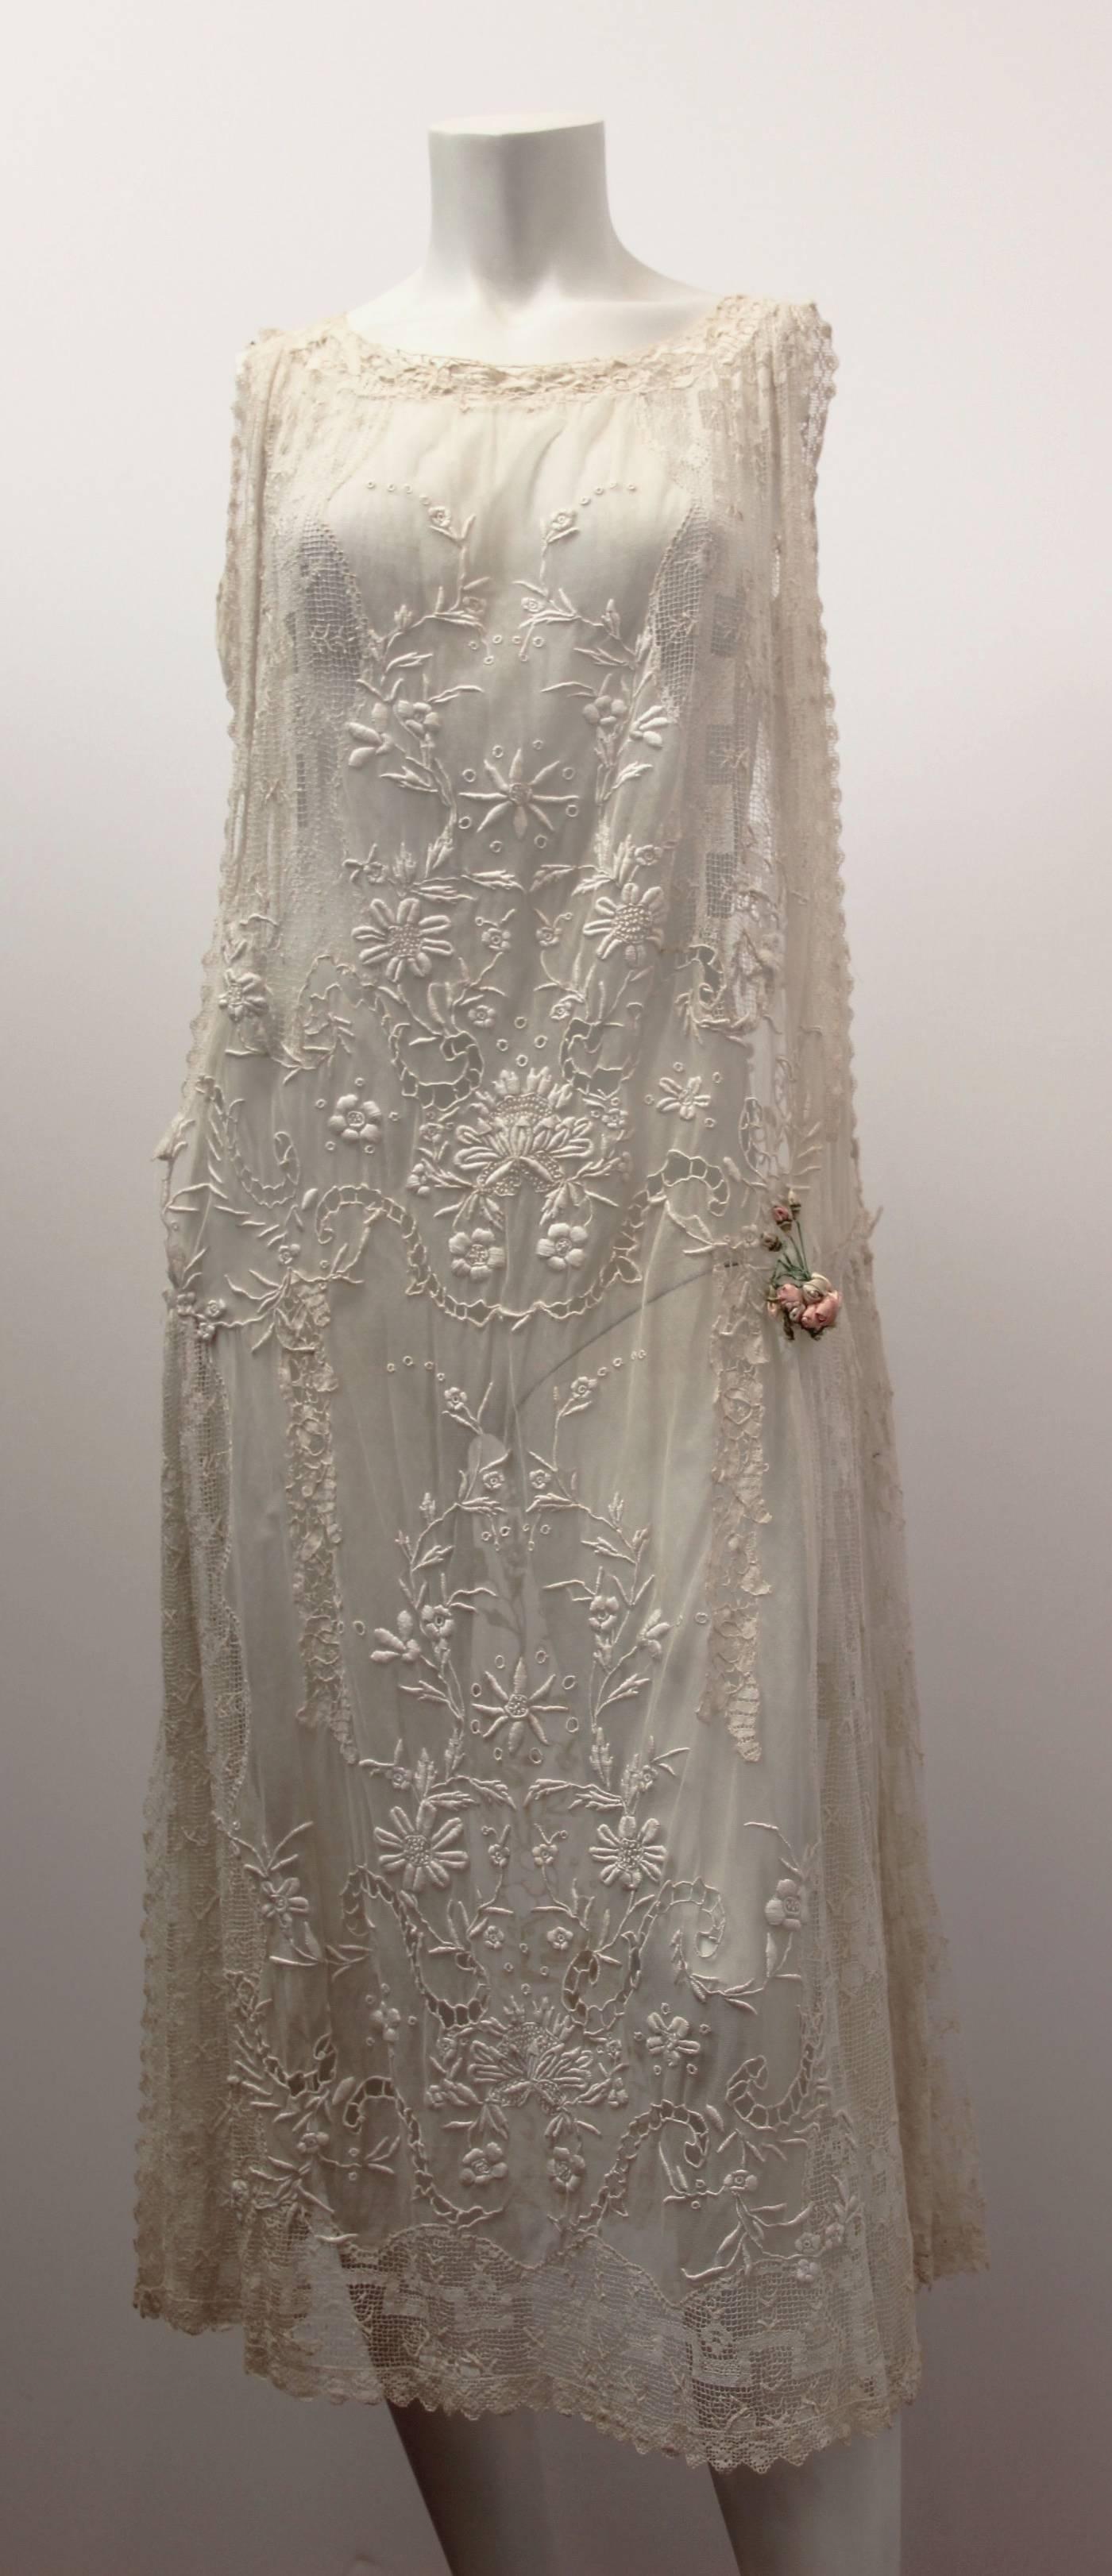 embroidered lace wedding gown